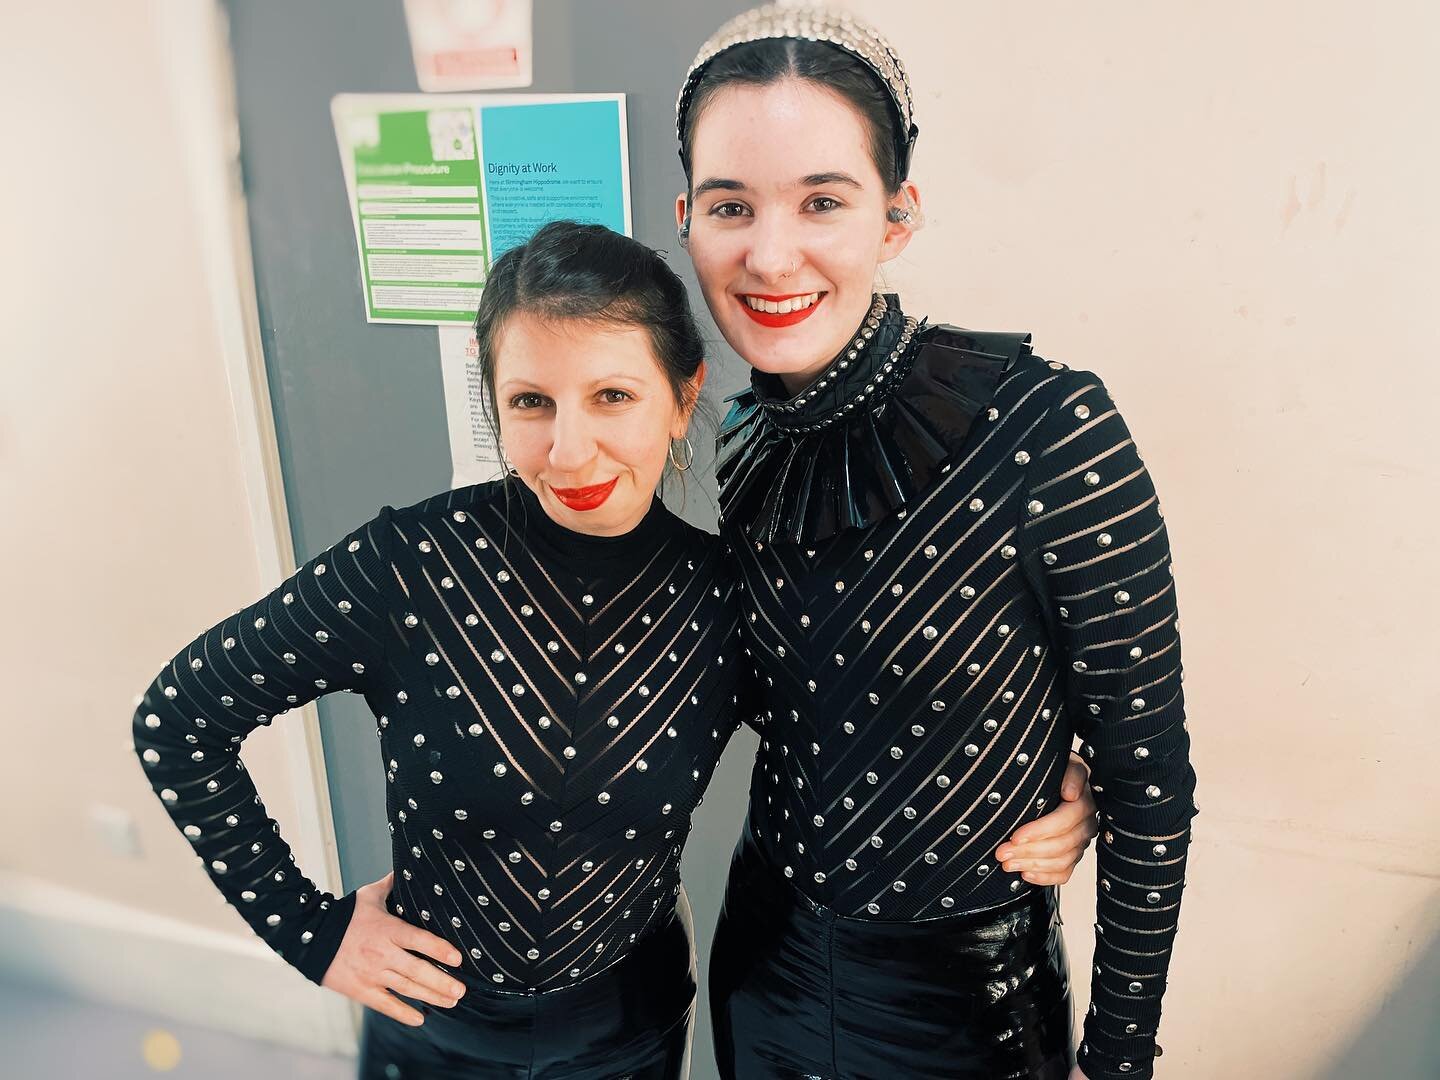 Bessie and Maggie!

I love when @maddyplaysguitar is also depping in SIX because she plays beautiful jazz standards on her guitar in the dressing room that sooth the soul.

Wishing the @sixthemusicaluktour team an amazing time in South Korea!